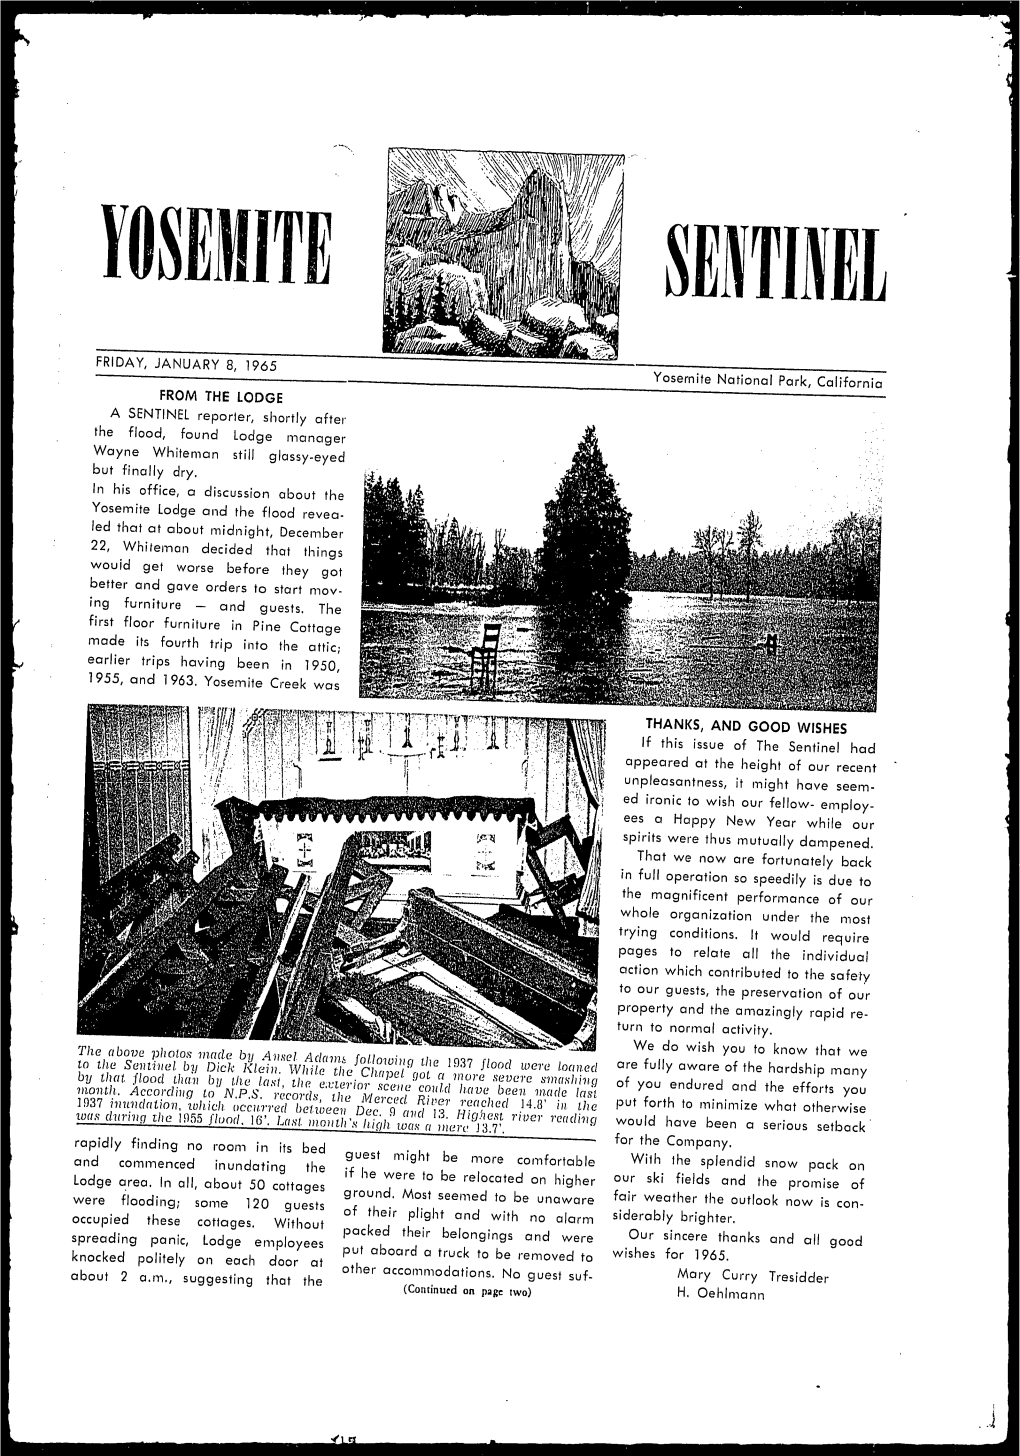 FRIDAY, JANUARY 8, 1965 Yosemite National Park, California from the LODGE a SENTINEL Reporler, Shortly After the Flood, Found Lo